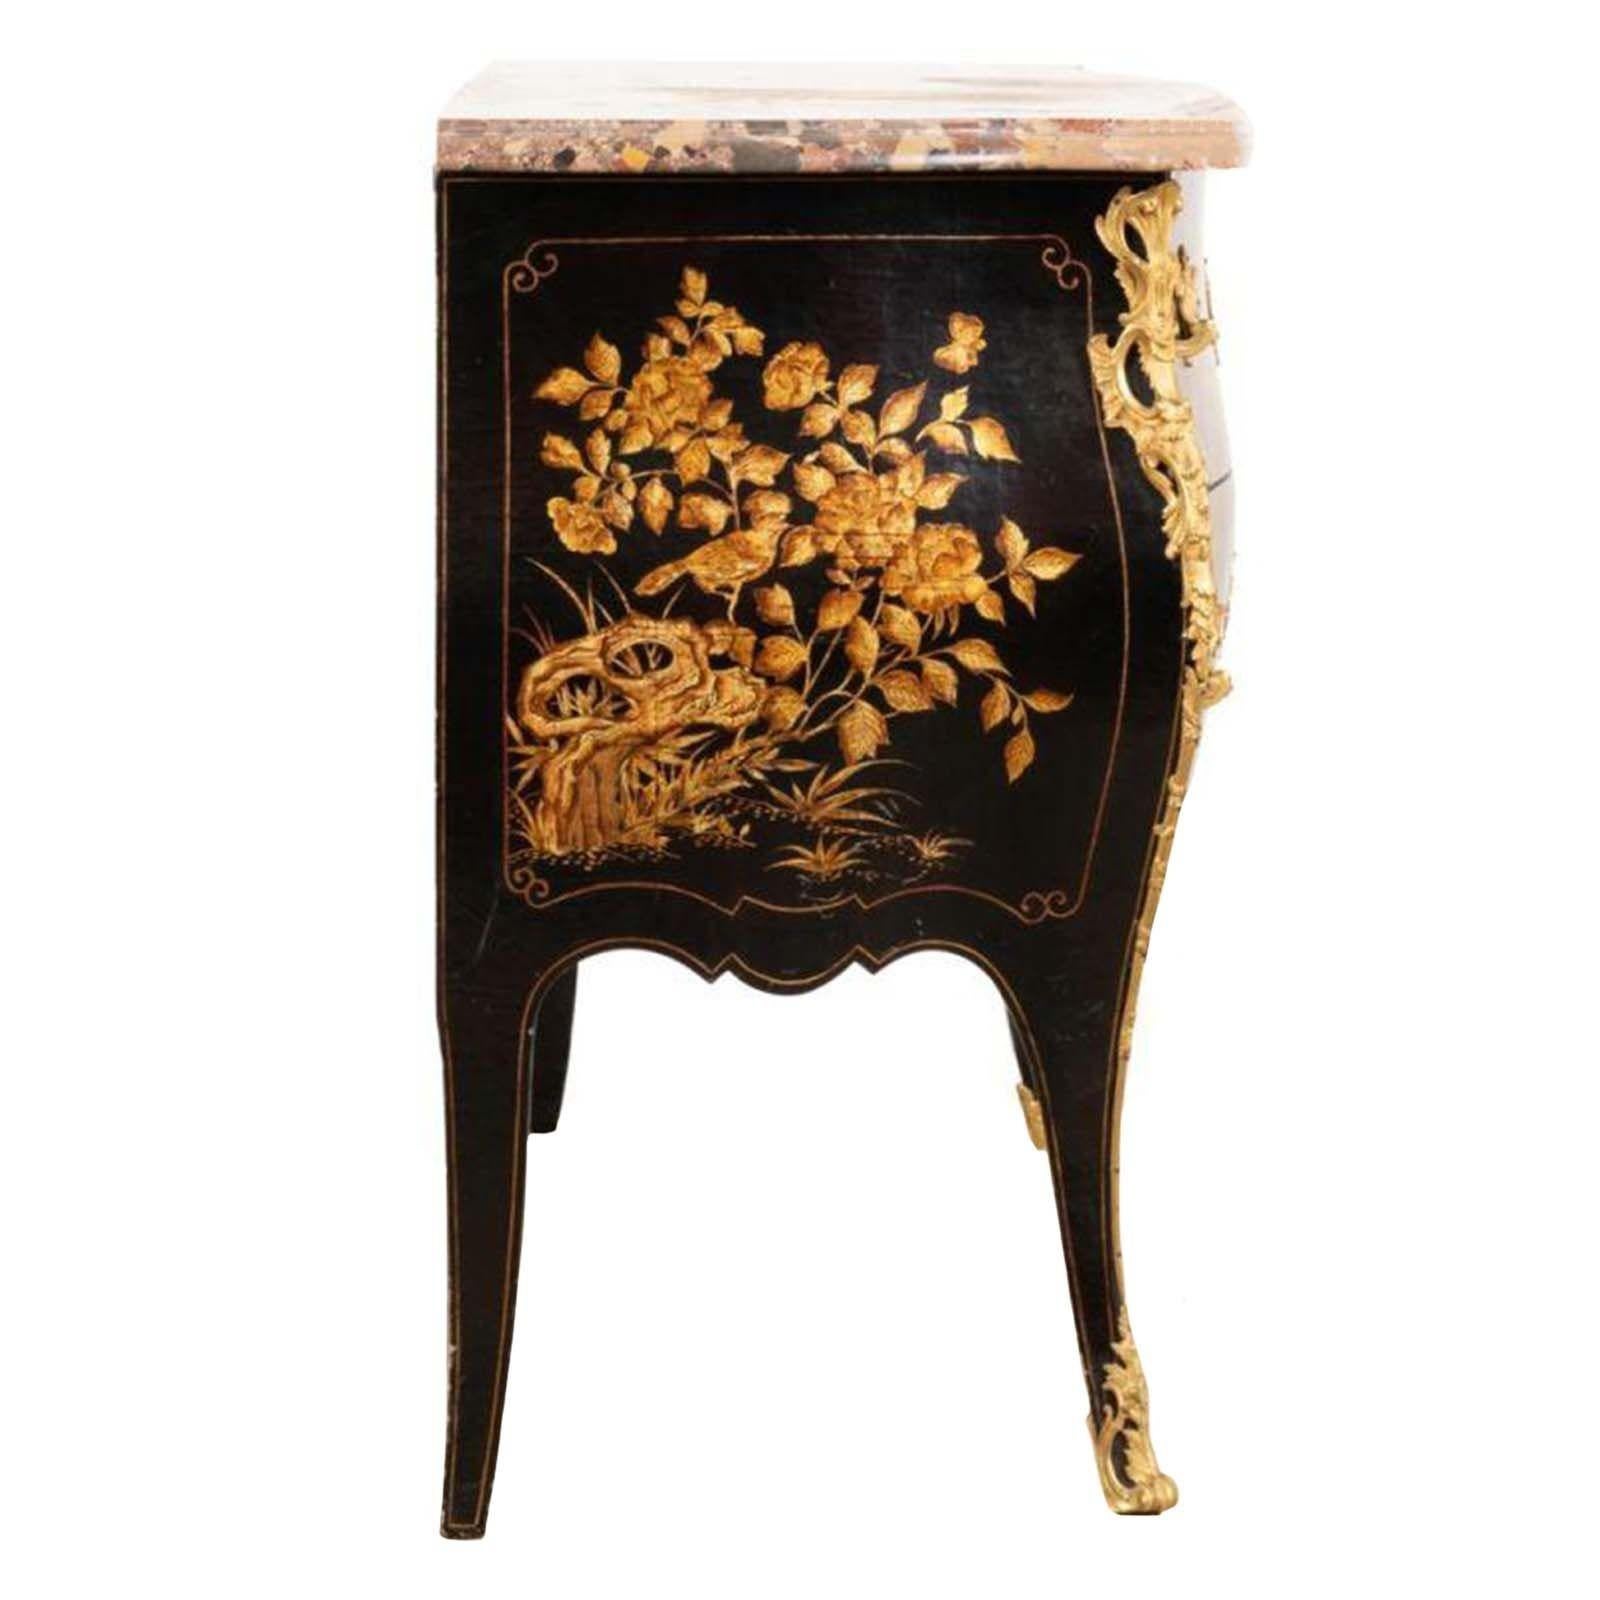 French Coromandel style ebonized bombé commode with a quality Breche d' Alep marble top and beautiful gilt motif. Made in France, 1900.
Dimensions:
34.5